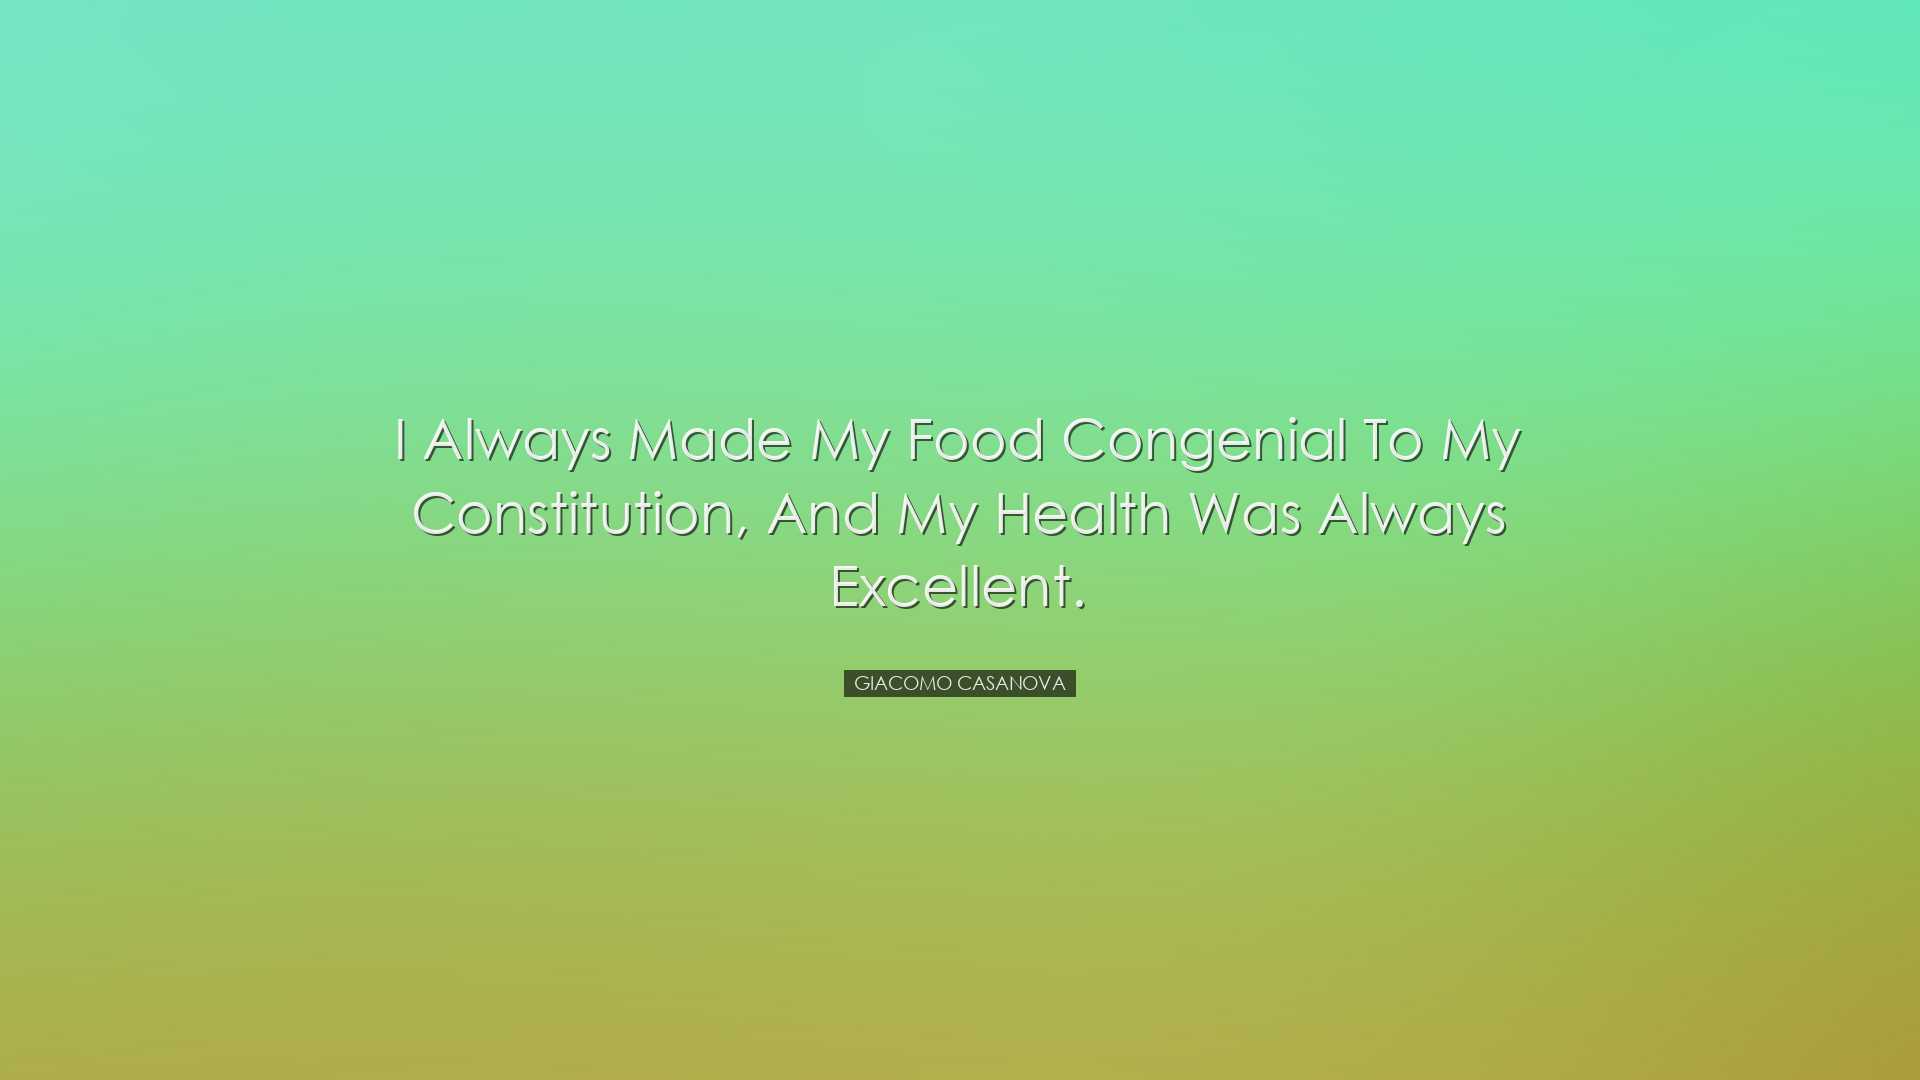 I always made my food congenial to my constitution, and my health